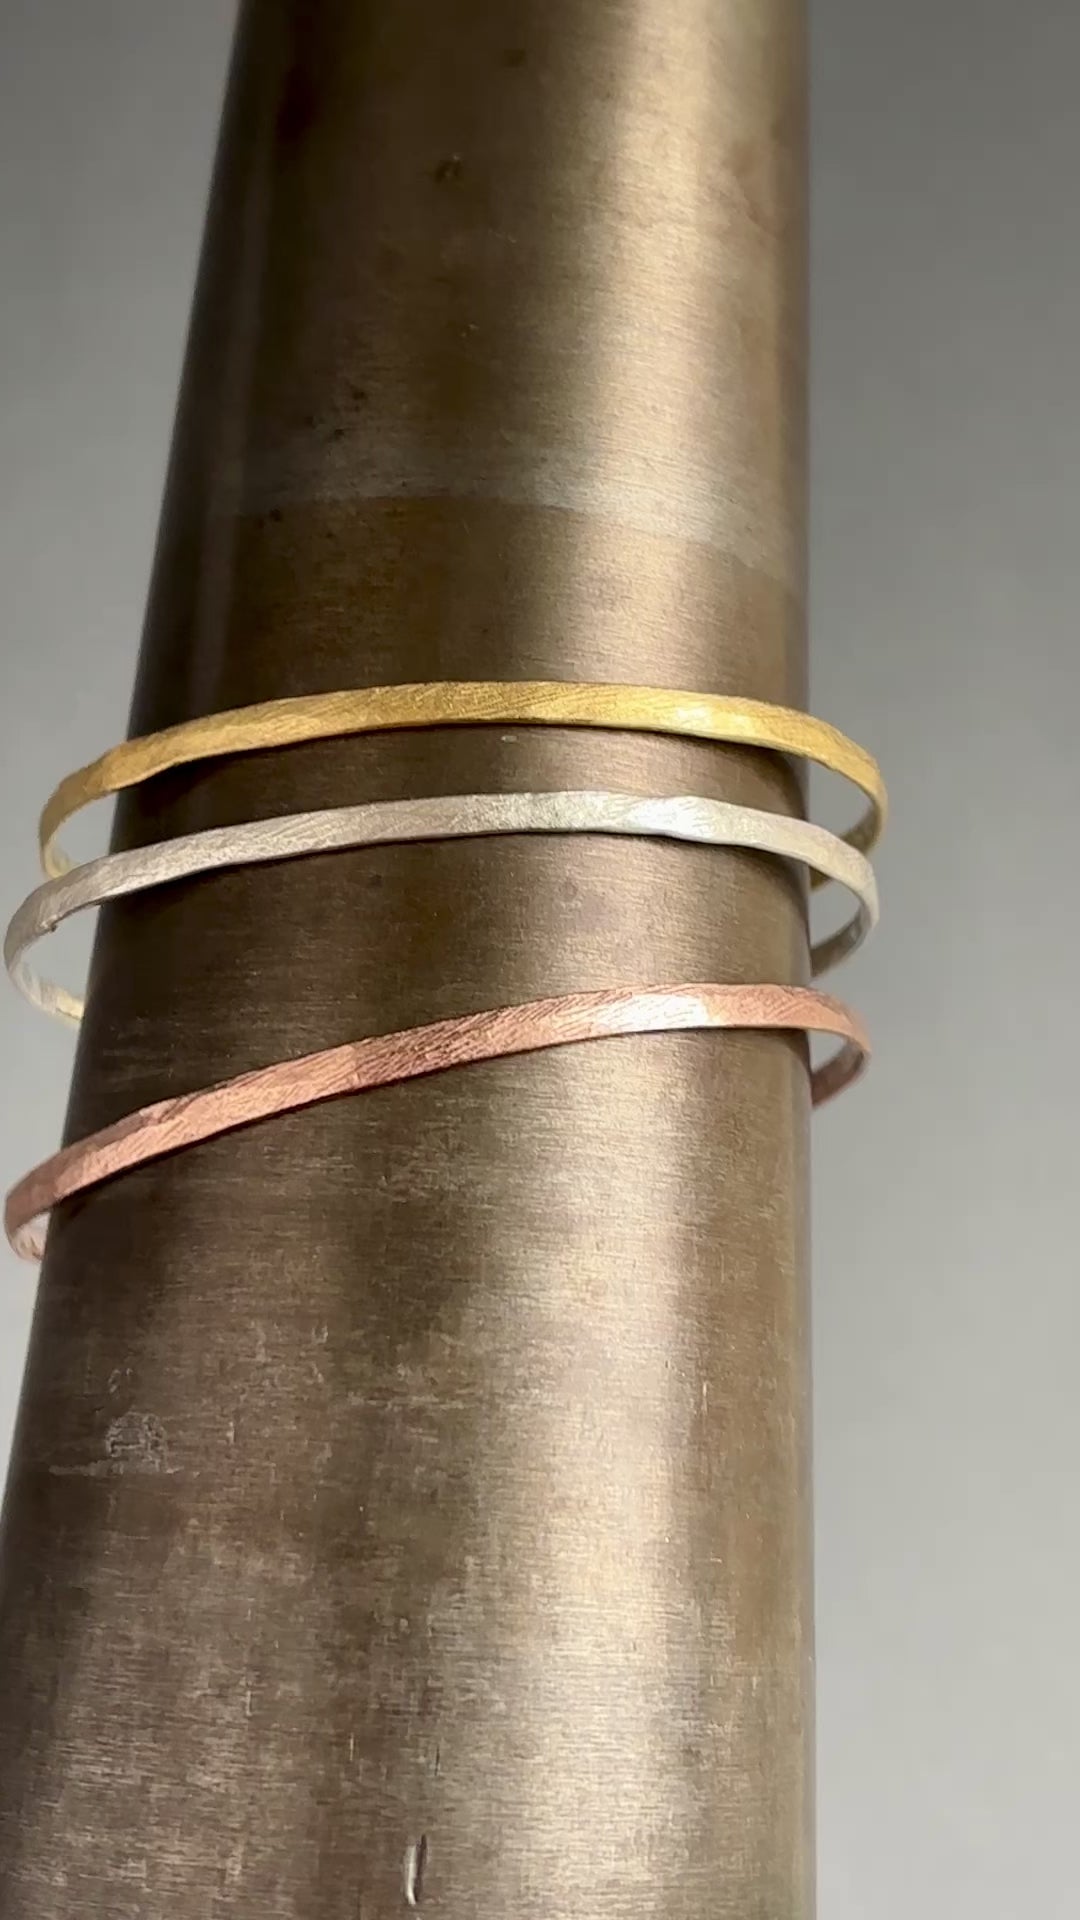 Bea Jareno Jewellery vídeo. Three Indian summer collection bangles with textures in a mandrel . Top recycled 24ct yellow gold vermeil, middle recycled sterling silver and bottom recycled 24ct rose gold vermeil . Grey background 